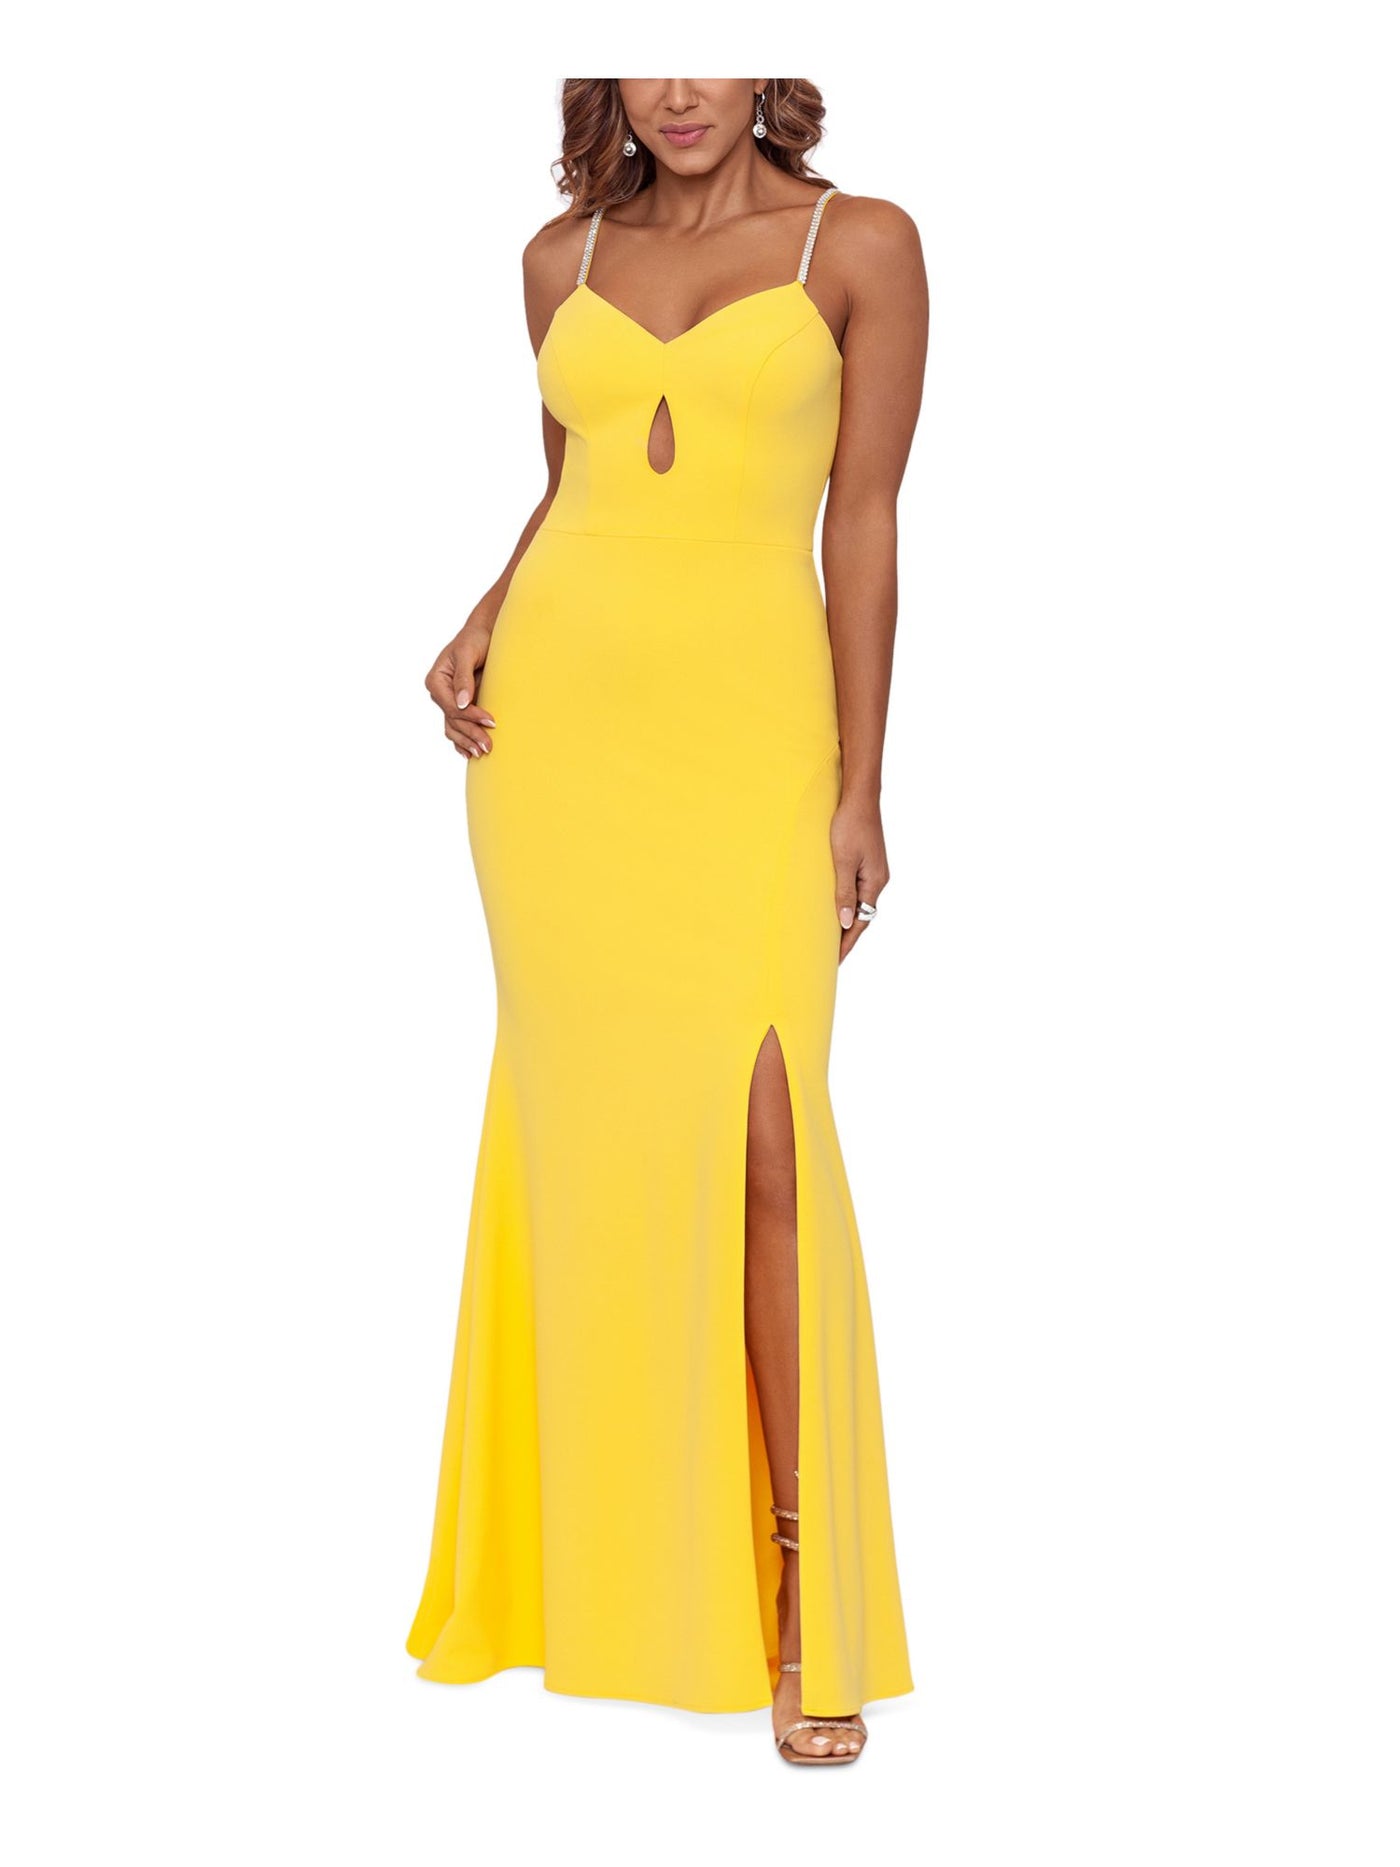 XSCAPE Womens Yellow Zippered Pleated Teardrop Cutout High Slit Lined Sleeveless V Neck Full-Length Party Gown Dress 2